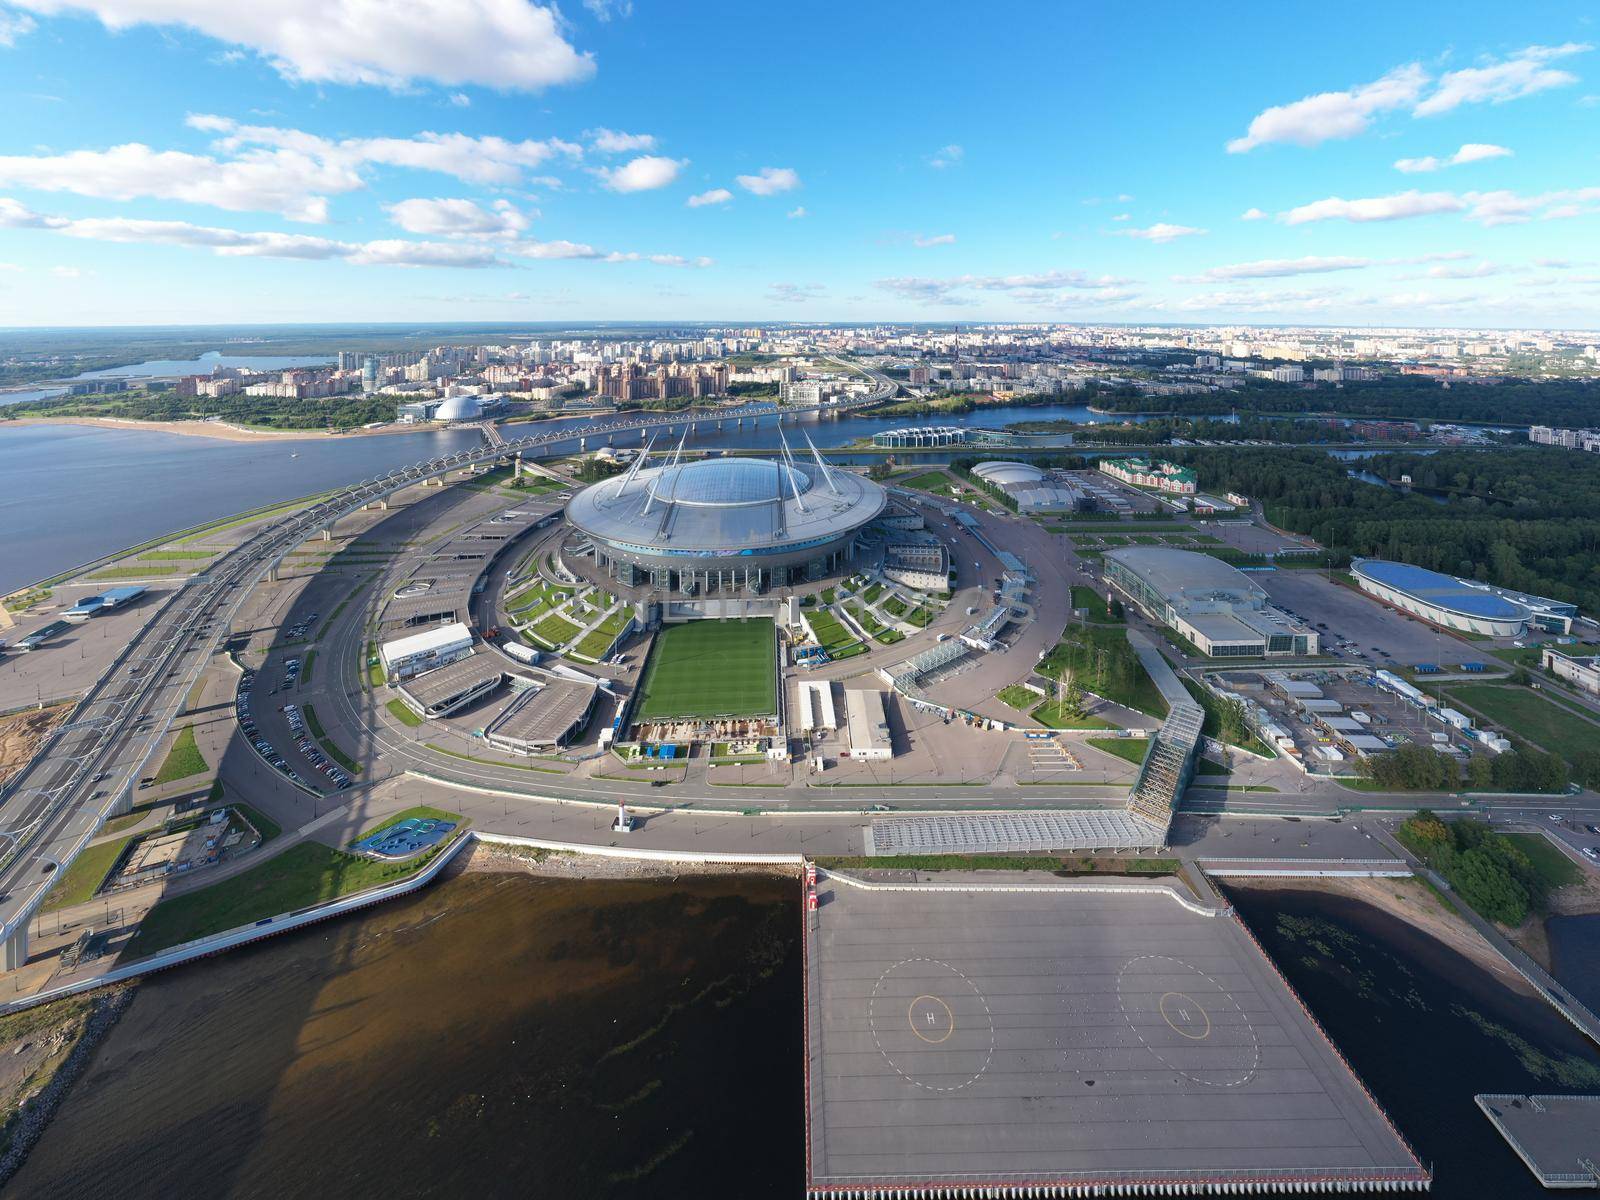 Russia, St.Petersburg, 01 September 2020: Drone point of view of new stadium Gazprom Arena, Euro 2020, retractable soccer field, skyscraper Lakhta center on background, clear weather, helipad by vladimirdrozdin